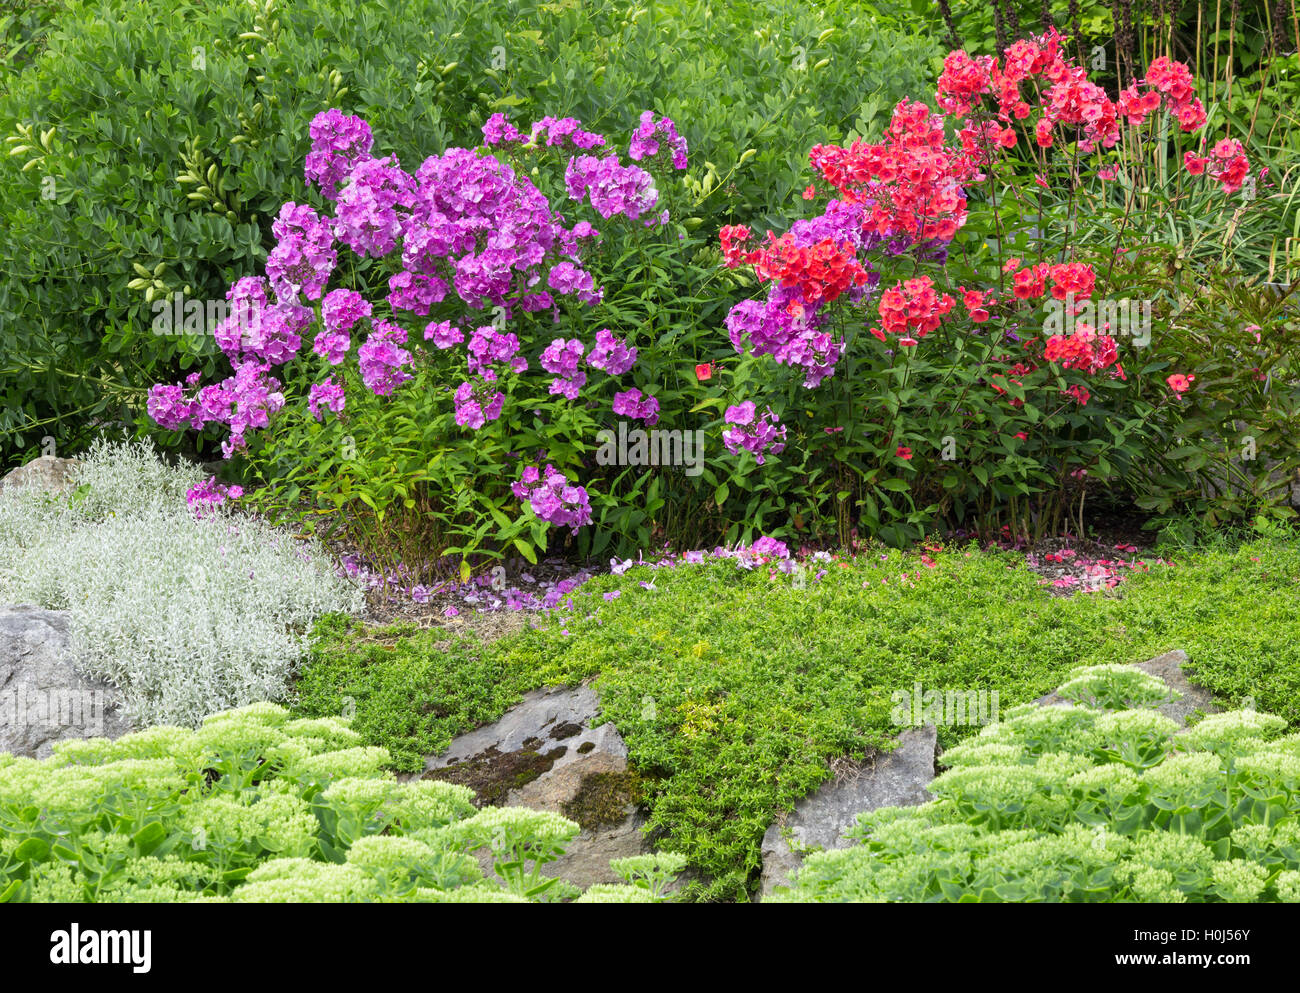 Garden with red and purple phlox Stock Photo